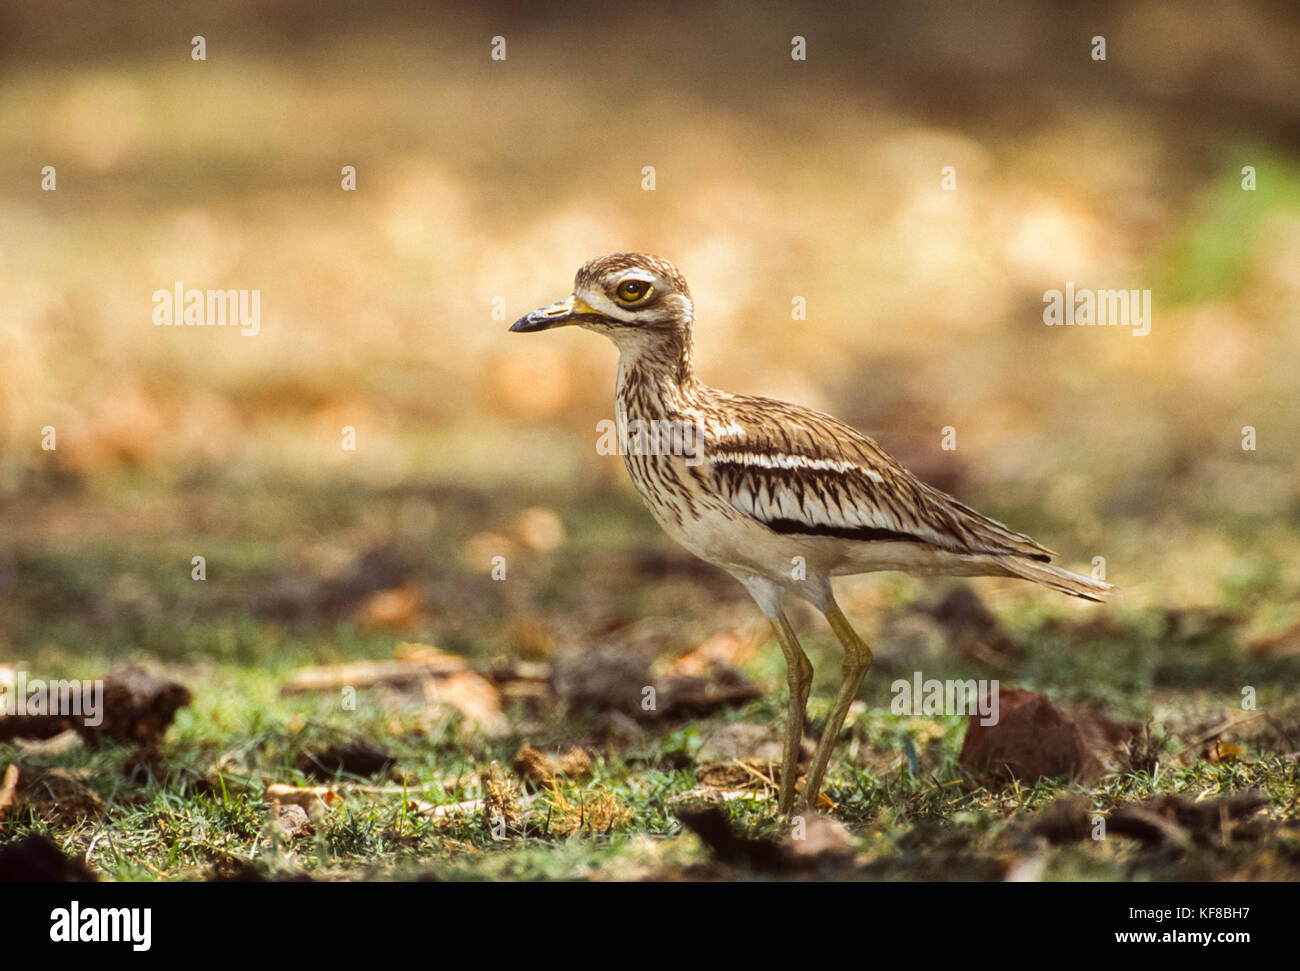 Indian Thick-Knee or Indian stone-curlew, Burhinus indicus, Keoladeo Ghana National Park, Bharatpur, Rajasthan, India Stock Photo